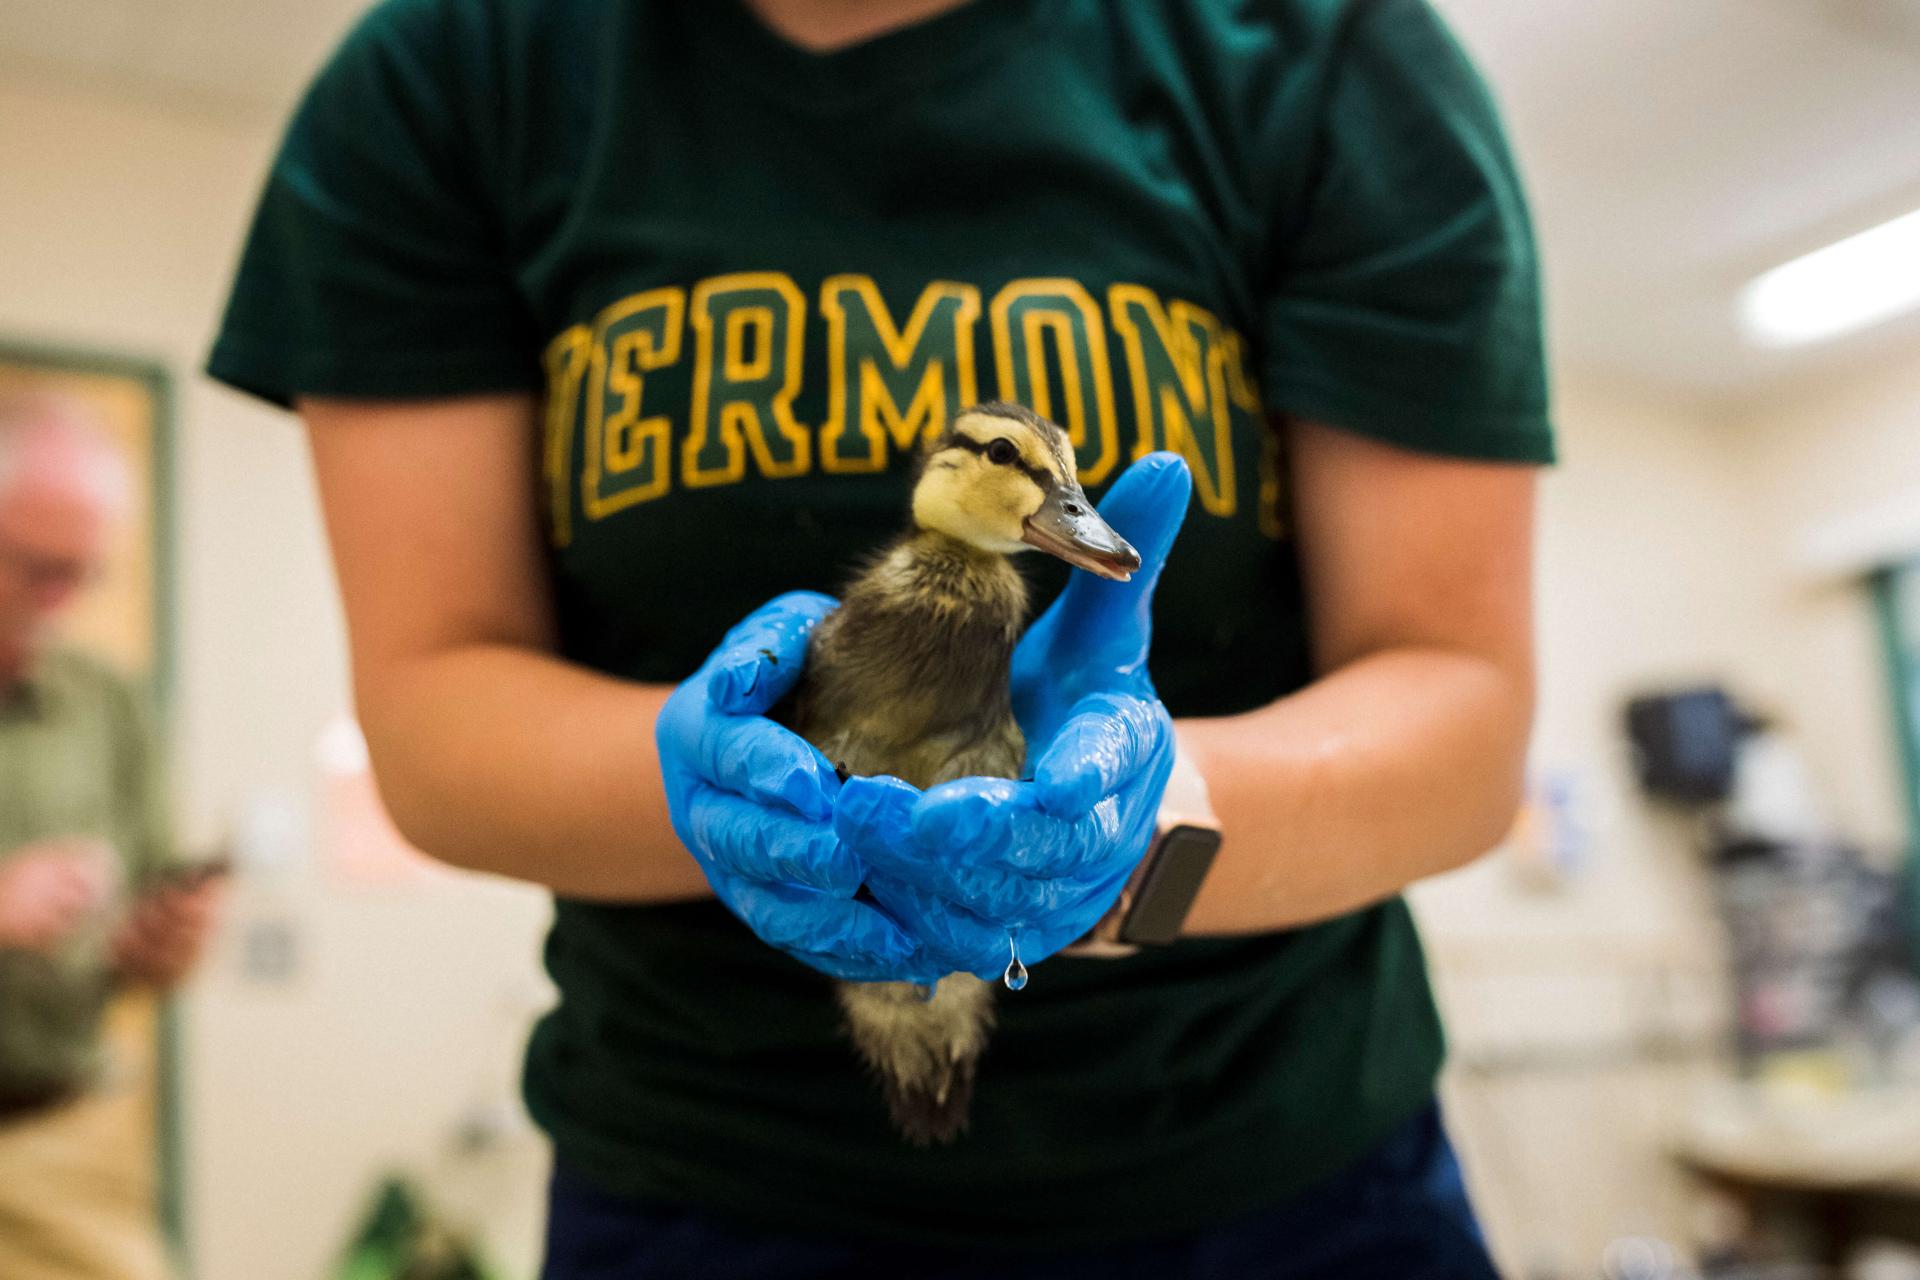 student on an internship rehabilitating wildlife, in this case a duck